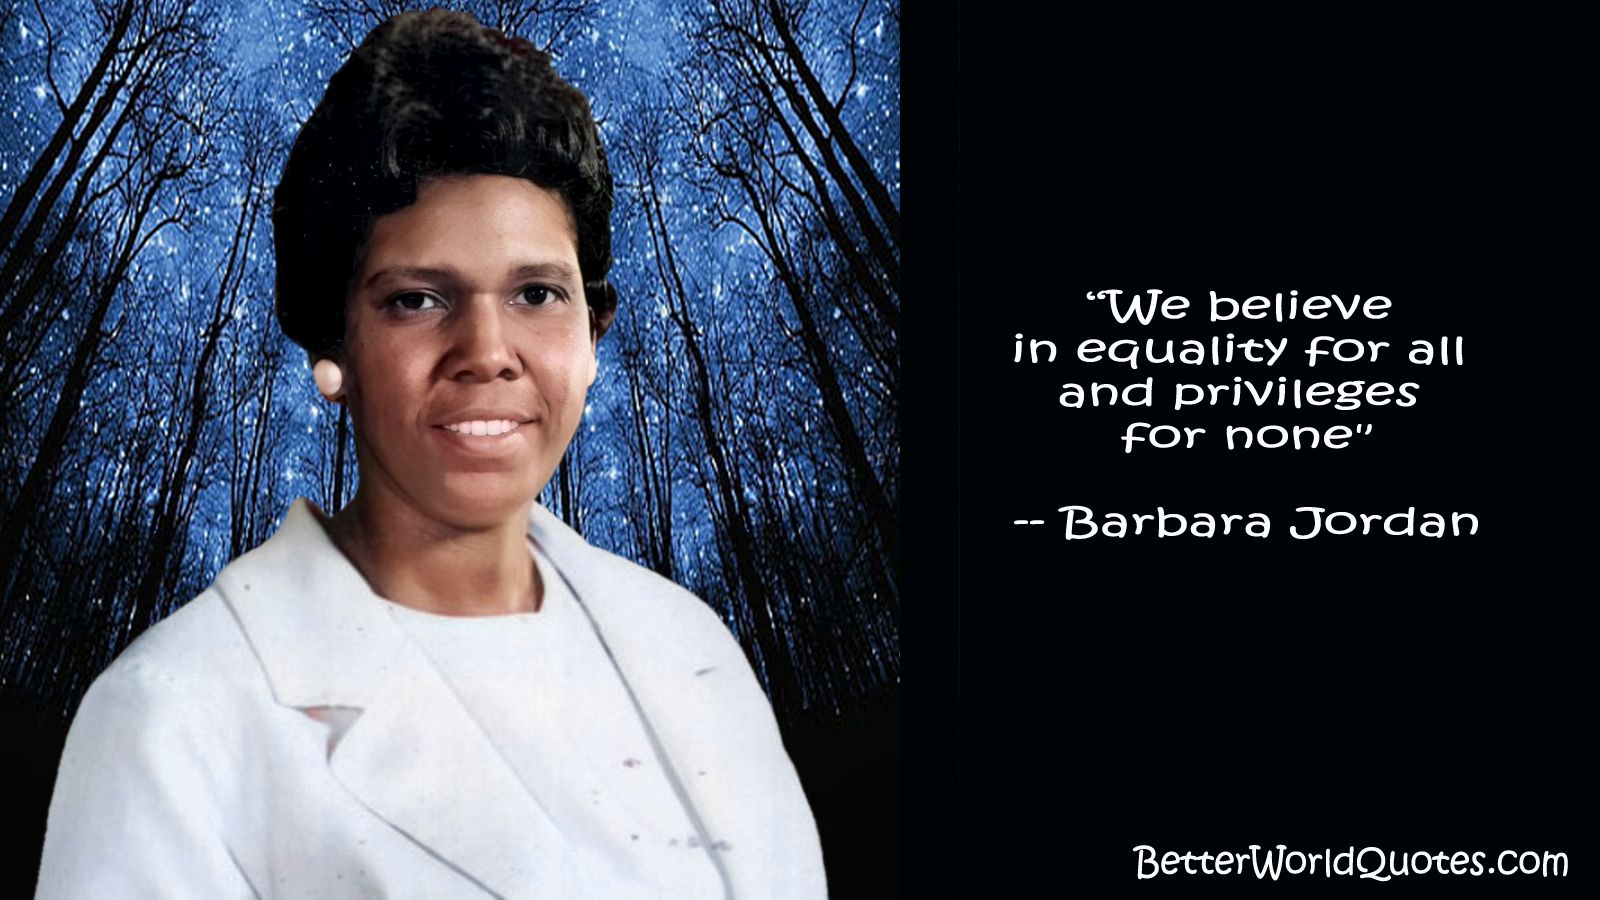 Barbara Jordan: We believe in equality for all and privileges for none.